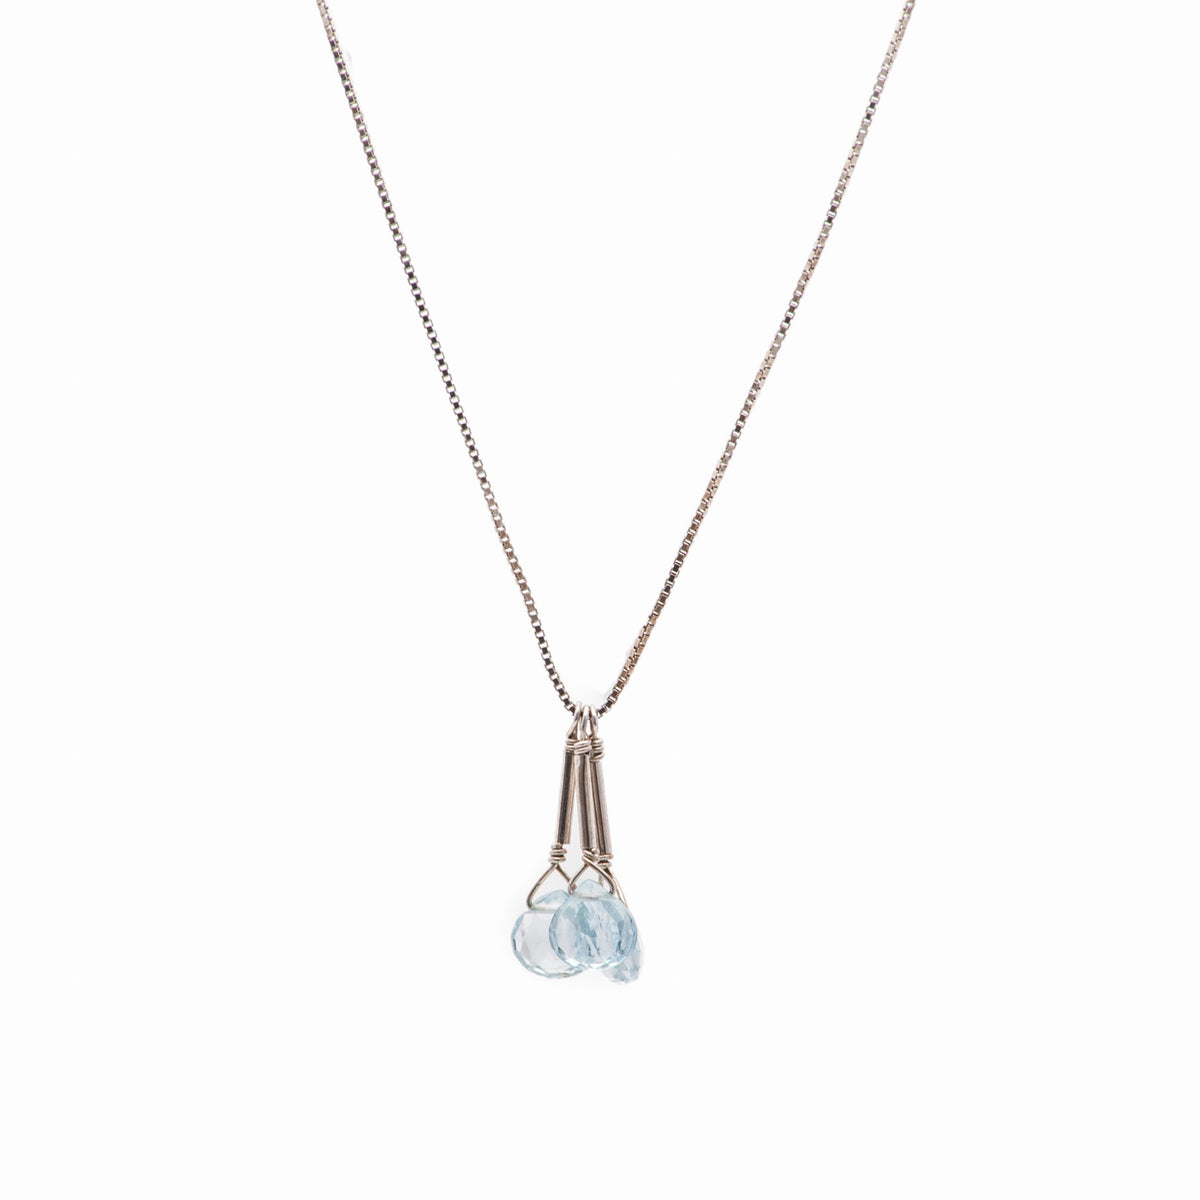 Iconic Gold and Faceted Three Aquamarine Drops Necklace